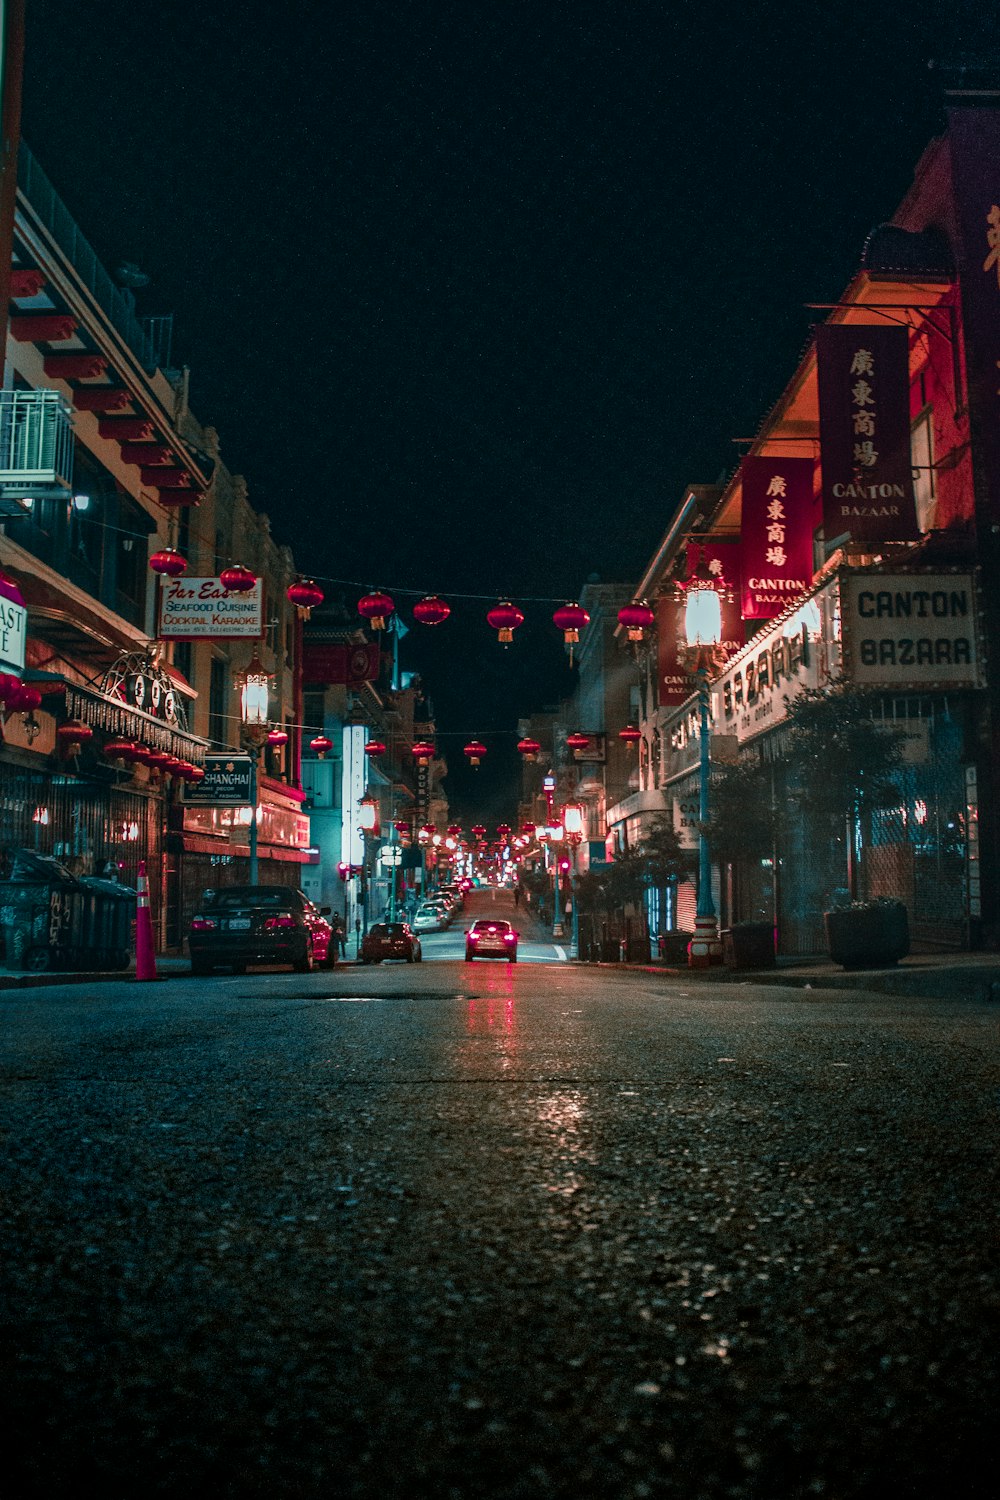 Canton Bazaar storefront during nighttime